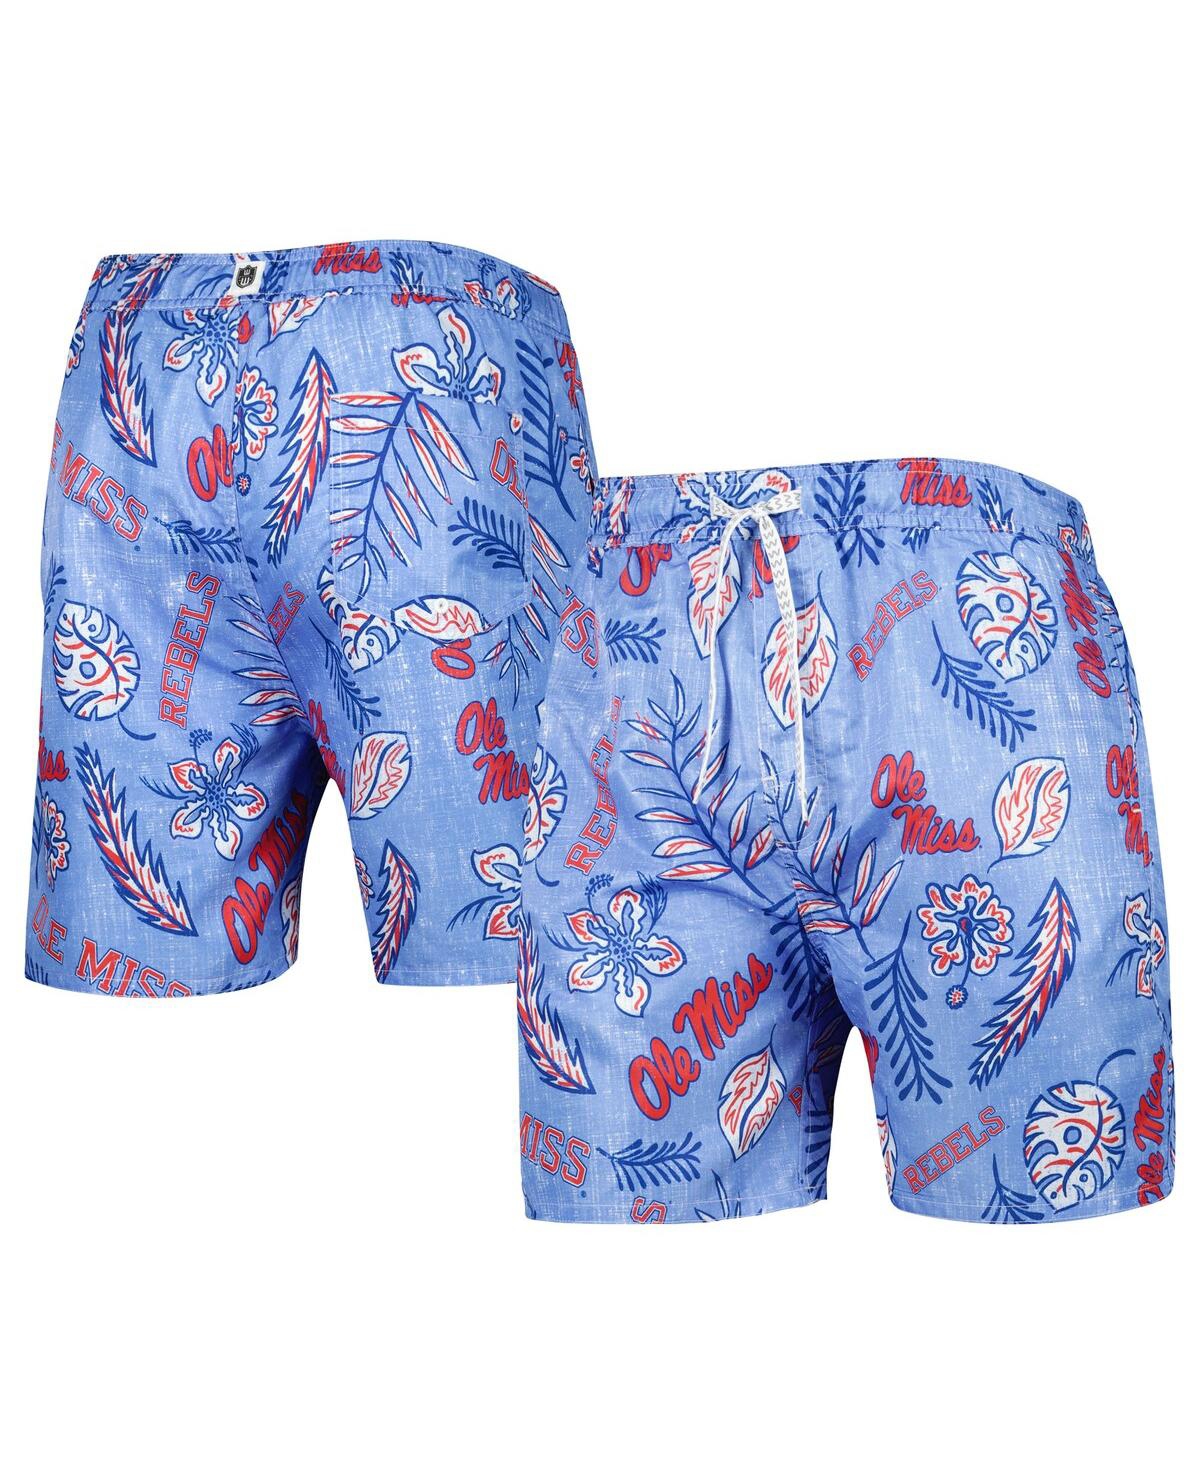 WES & WILLY MEN'S WES & WILLY POWDER BLUE OLE MISS REBELS VINTAGE-LIKE FLORAL SWIM TRUNKS